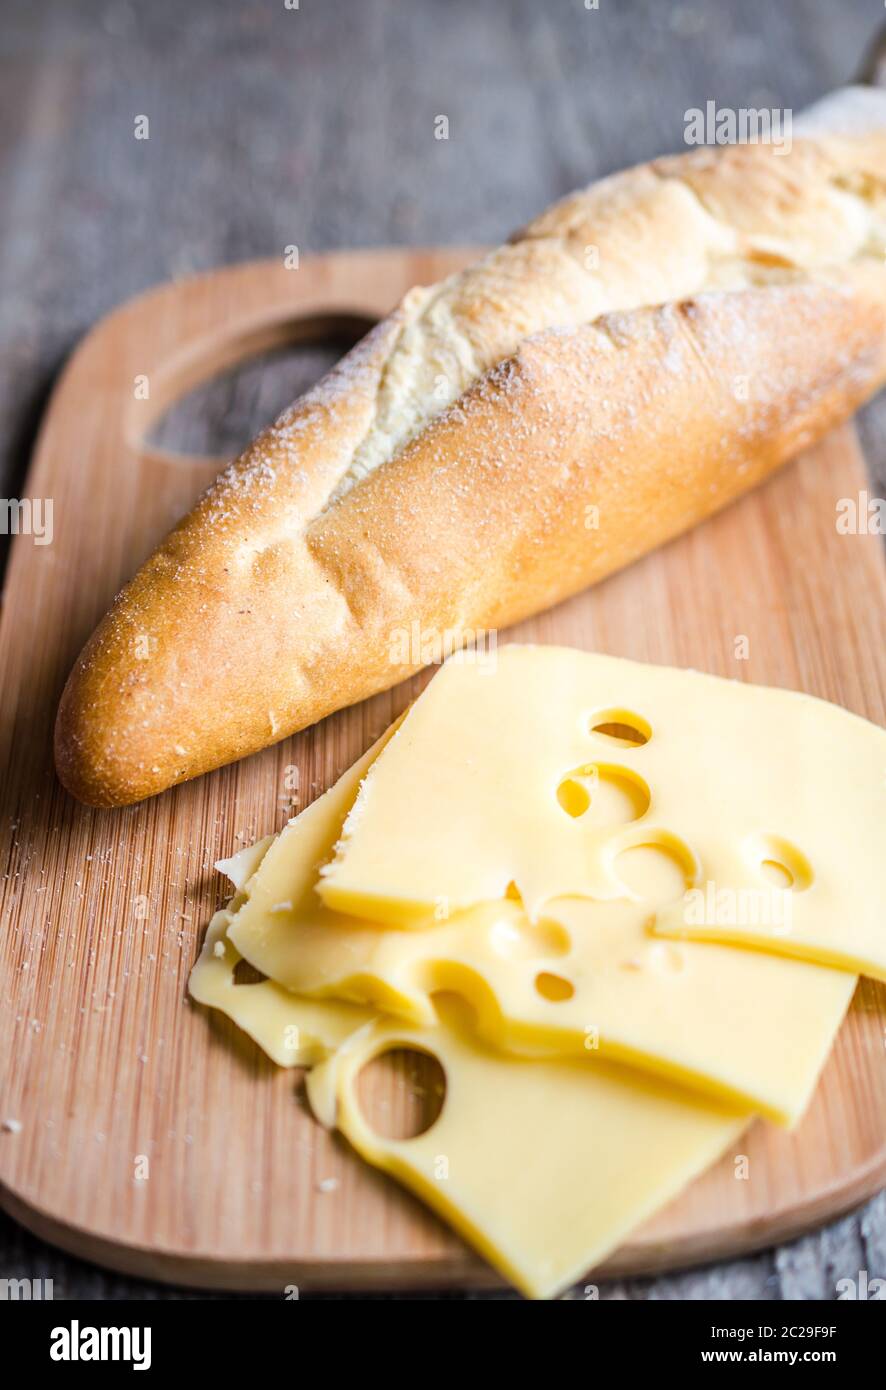 Sliced french baguette and cheese Stock Photo - Alamy